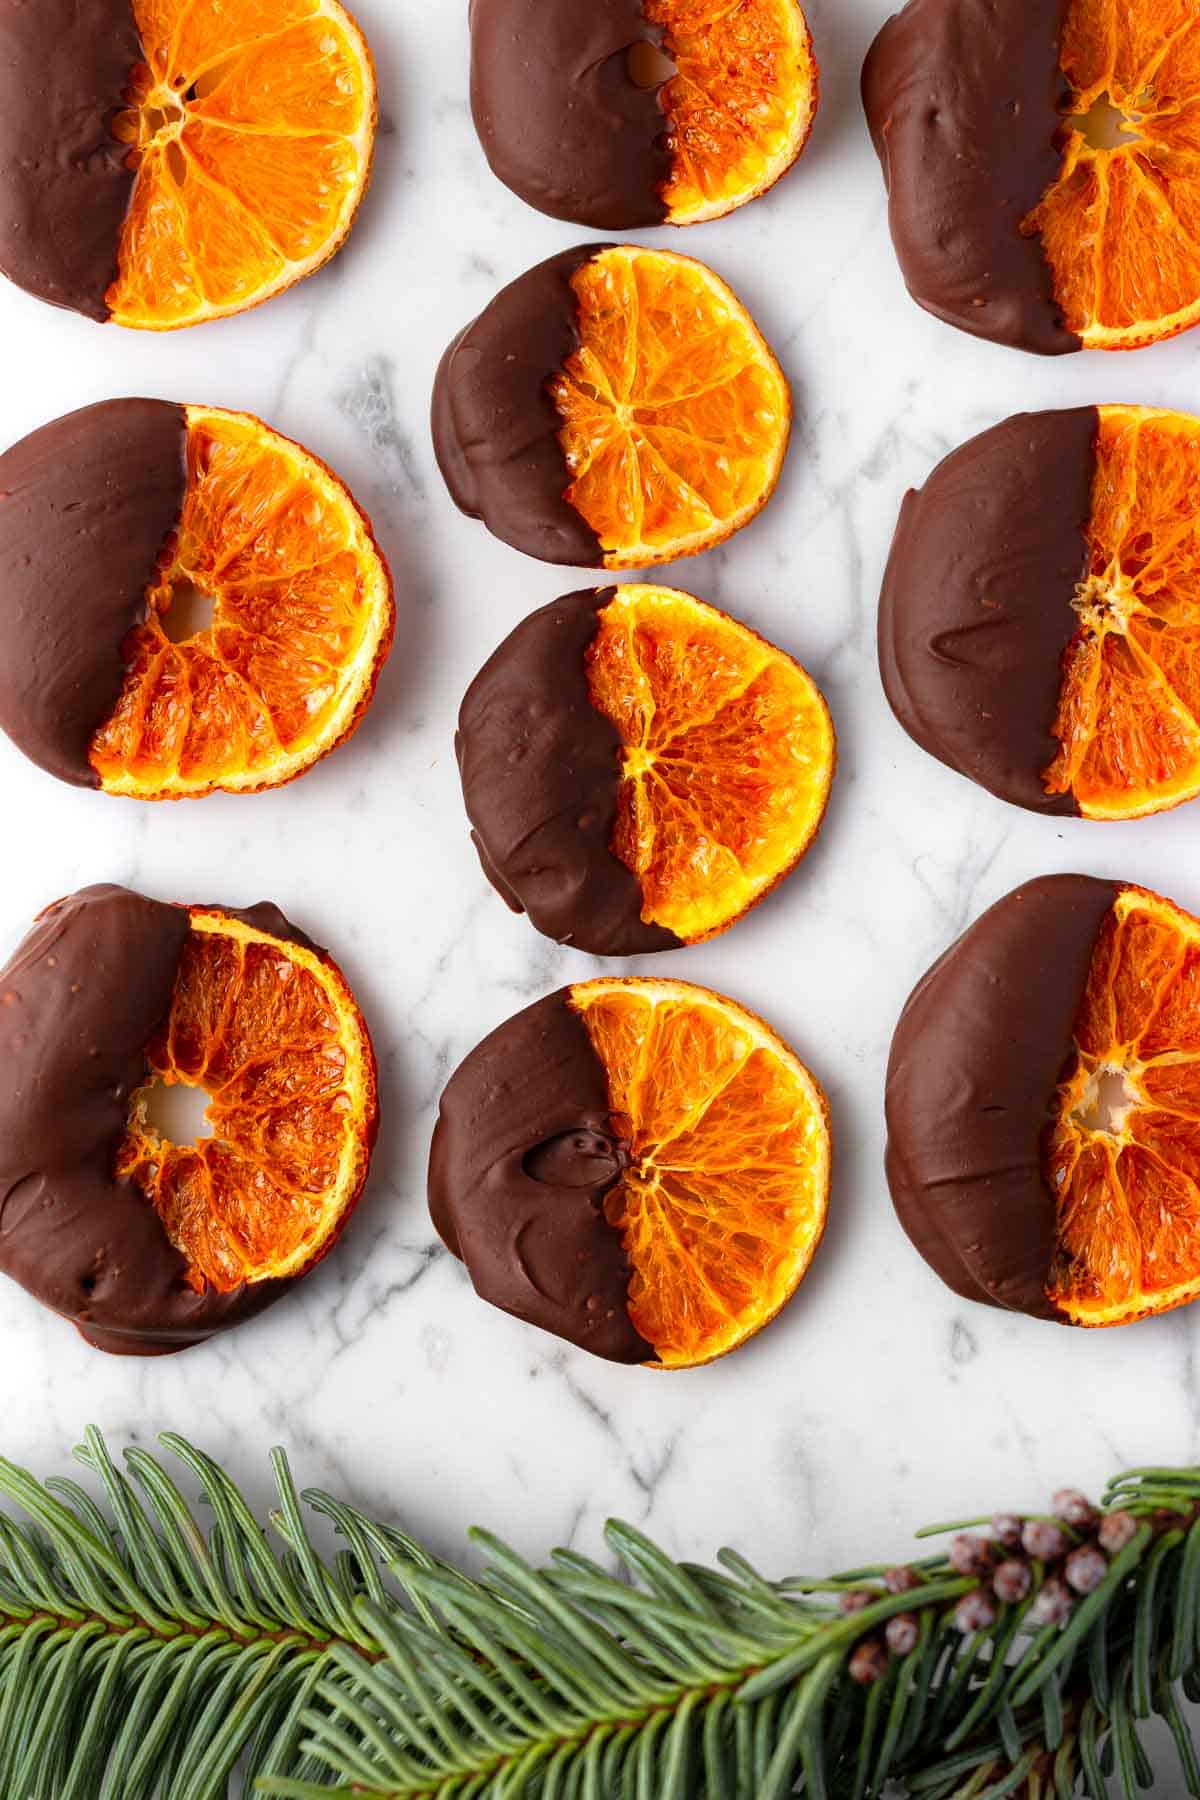 Chocolate-dipped satsuma orange slices on a marble surface with a Christmas tree branch below.